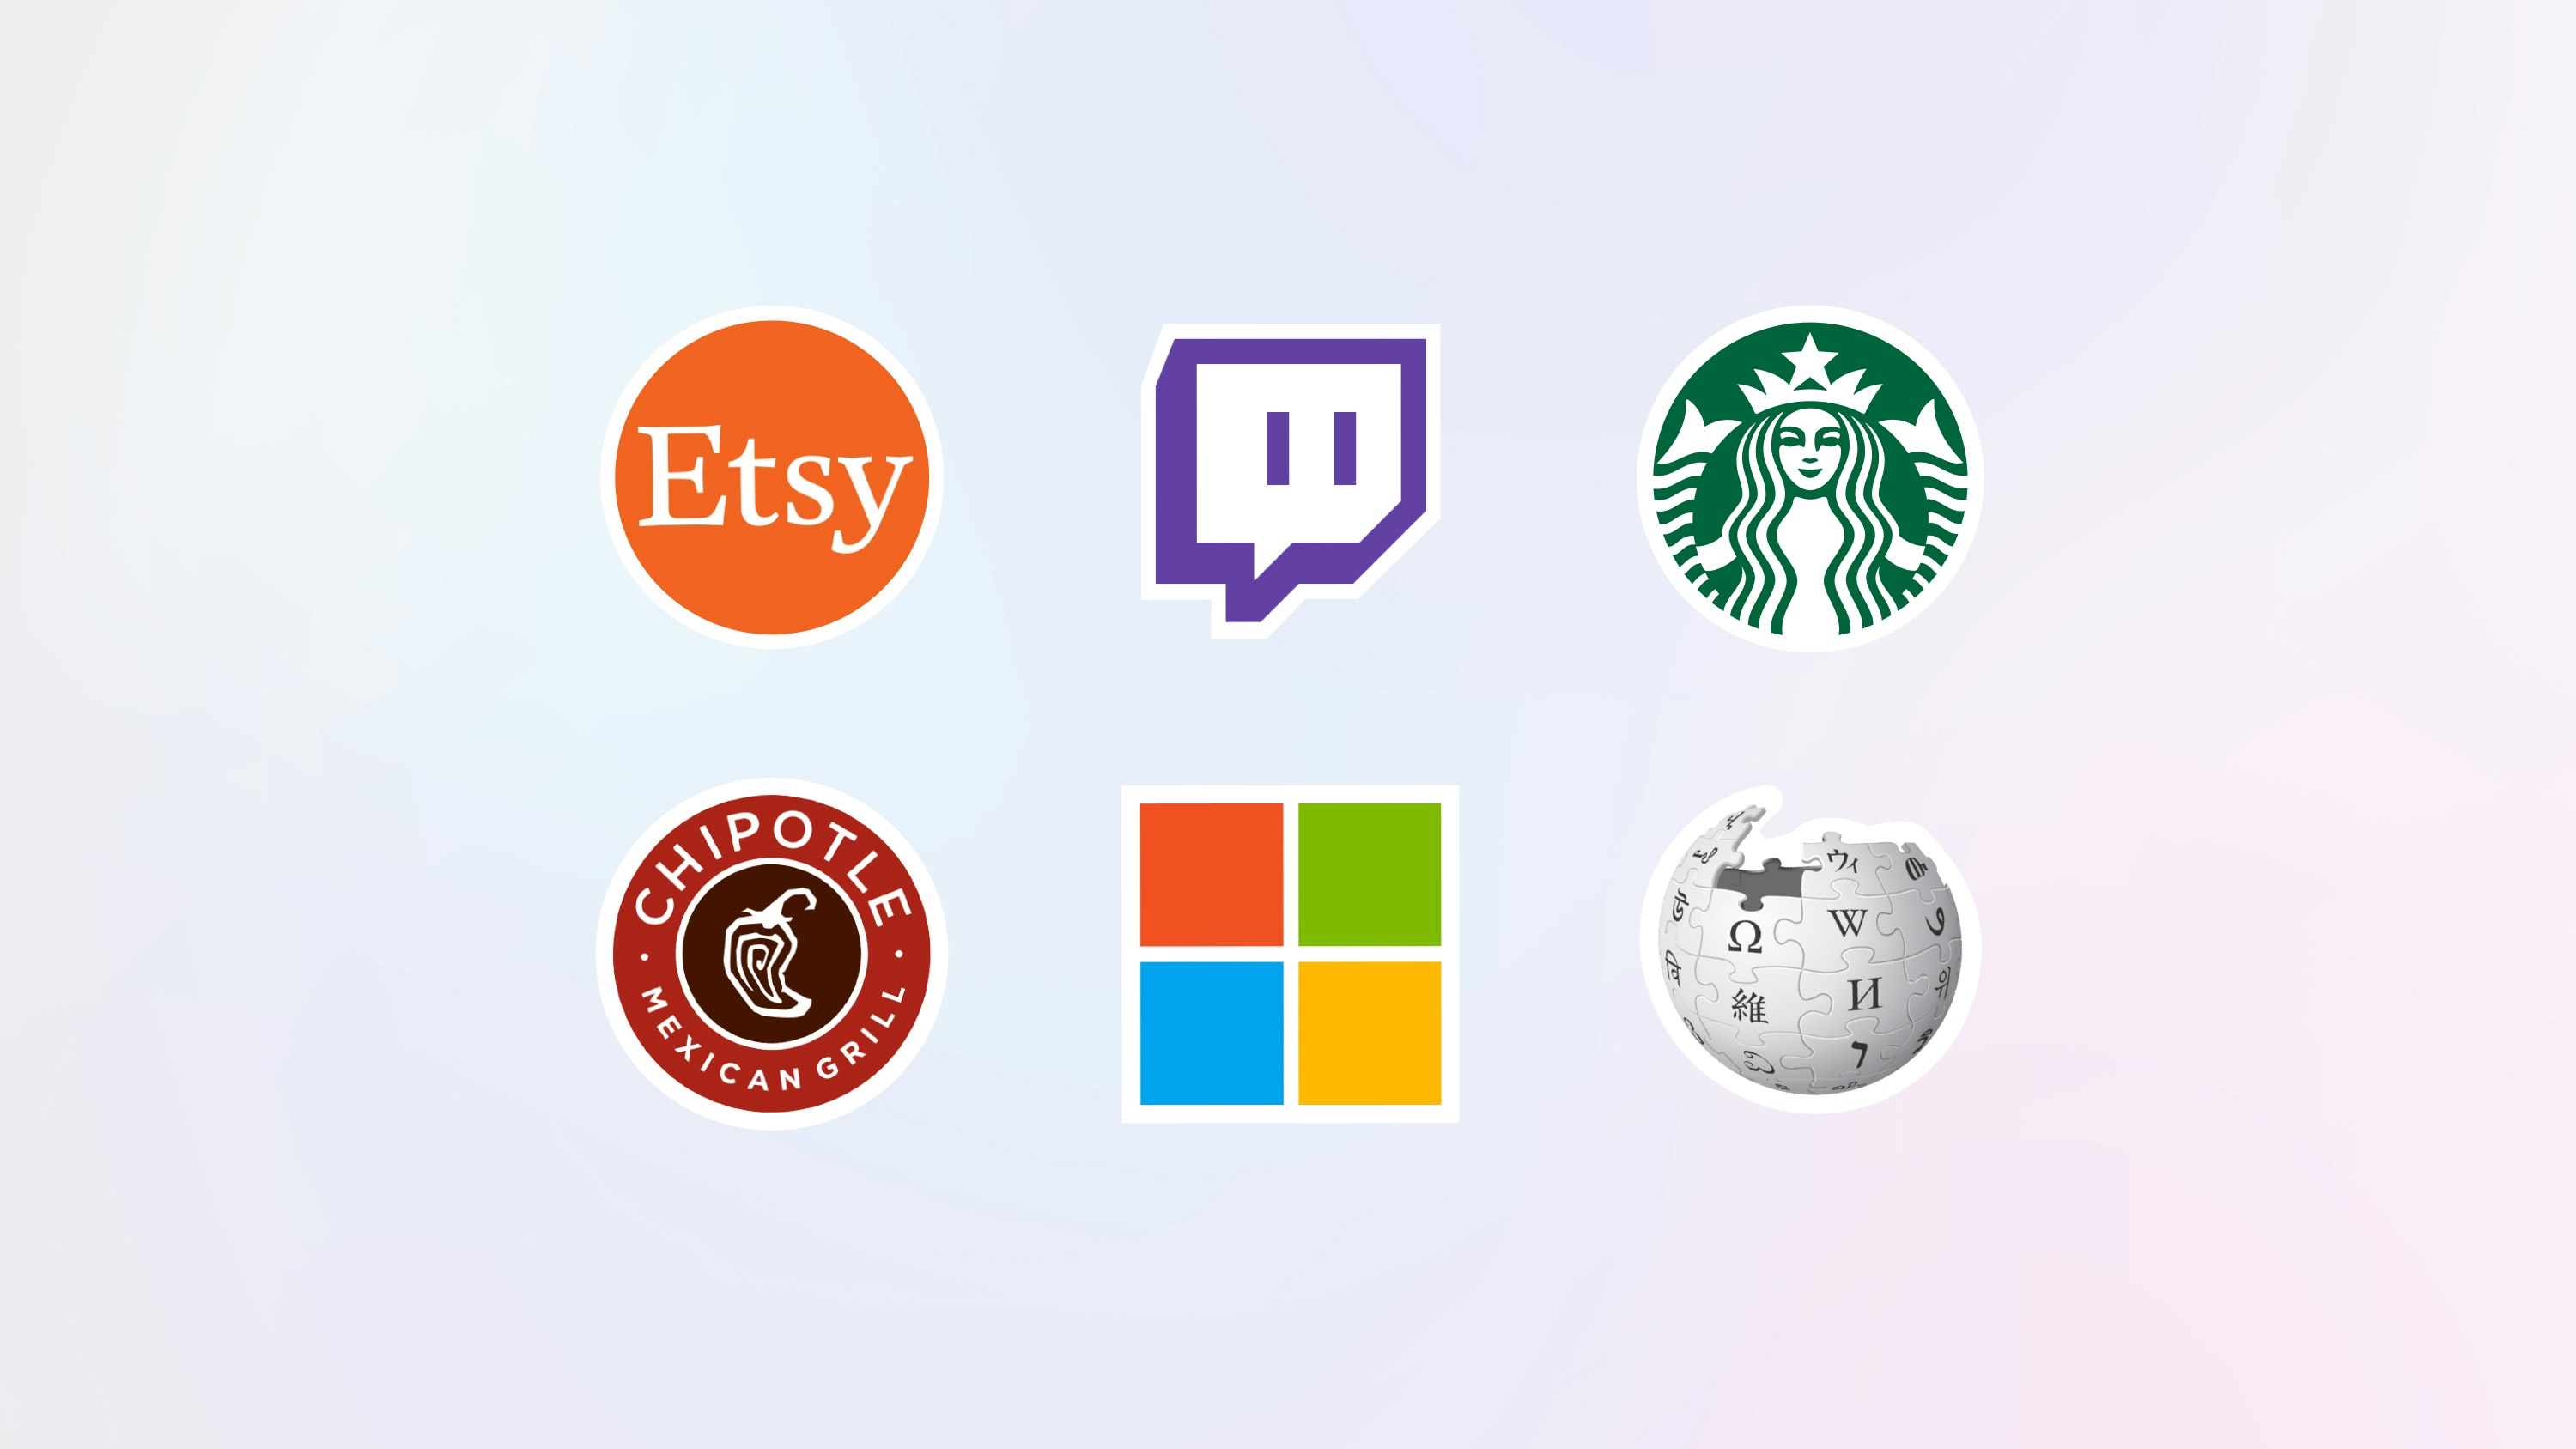 icons for businesses that accept bitcoin as payment in 2022 including etsy twitch starbucks chipotle windows and wikipedia